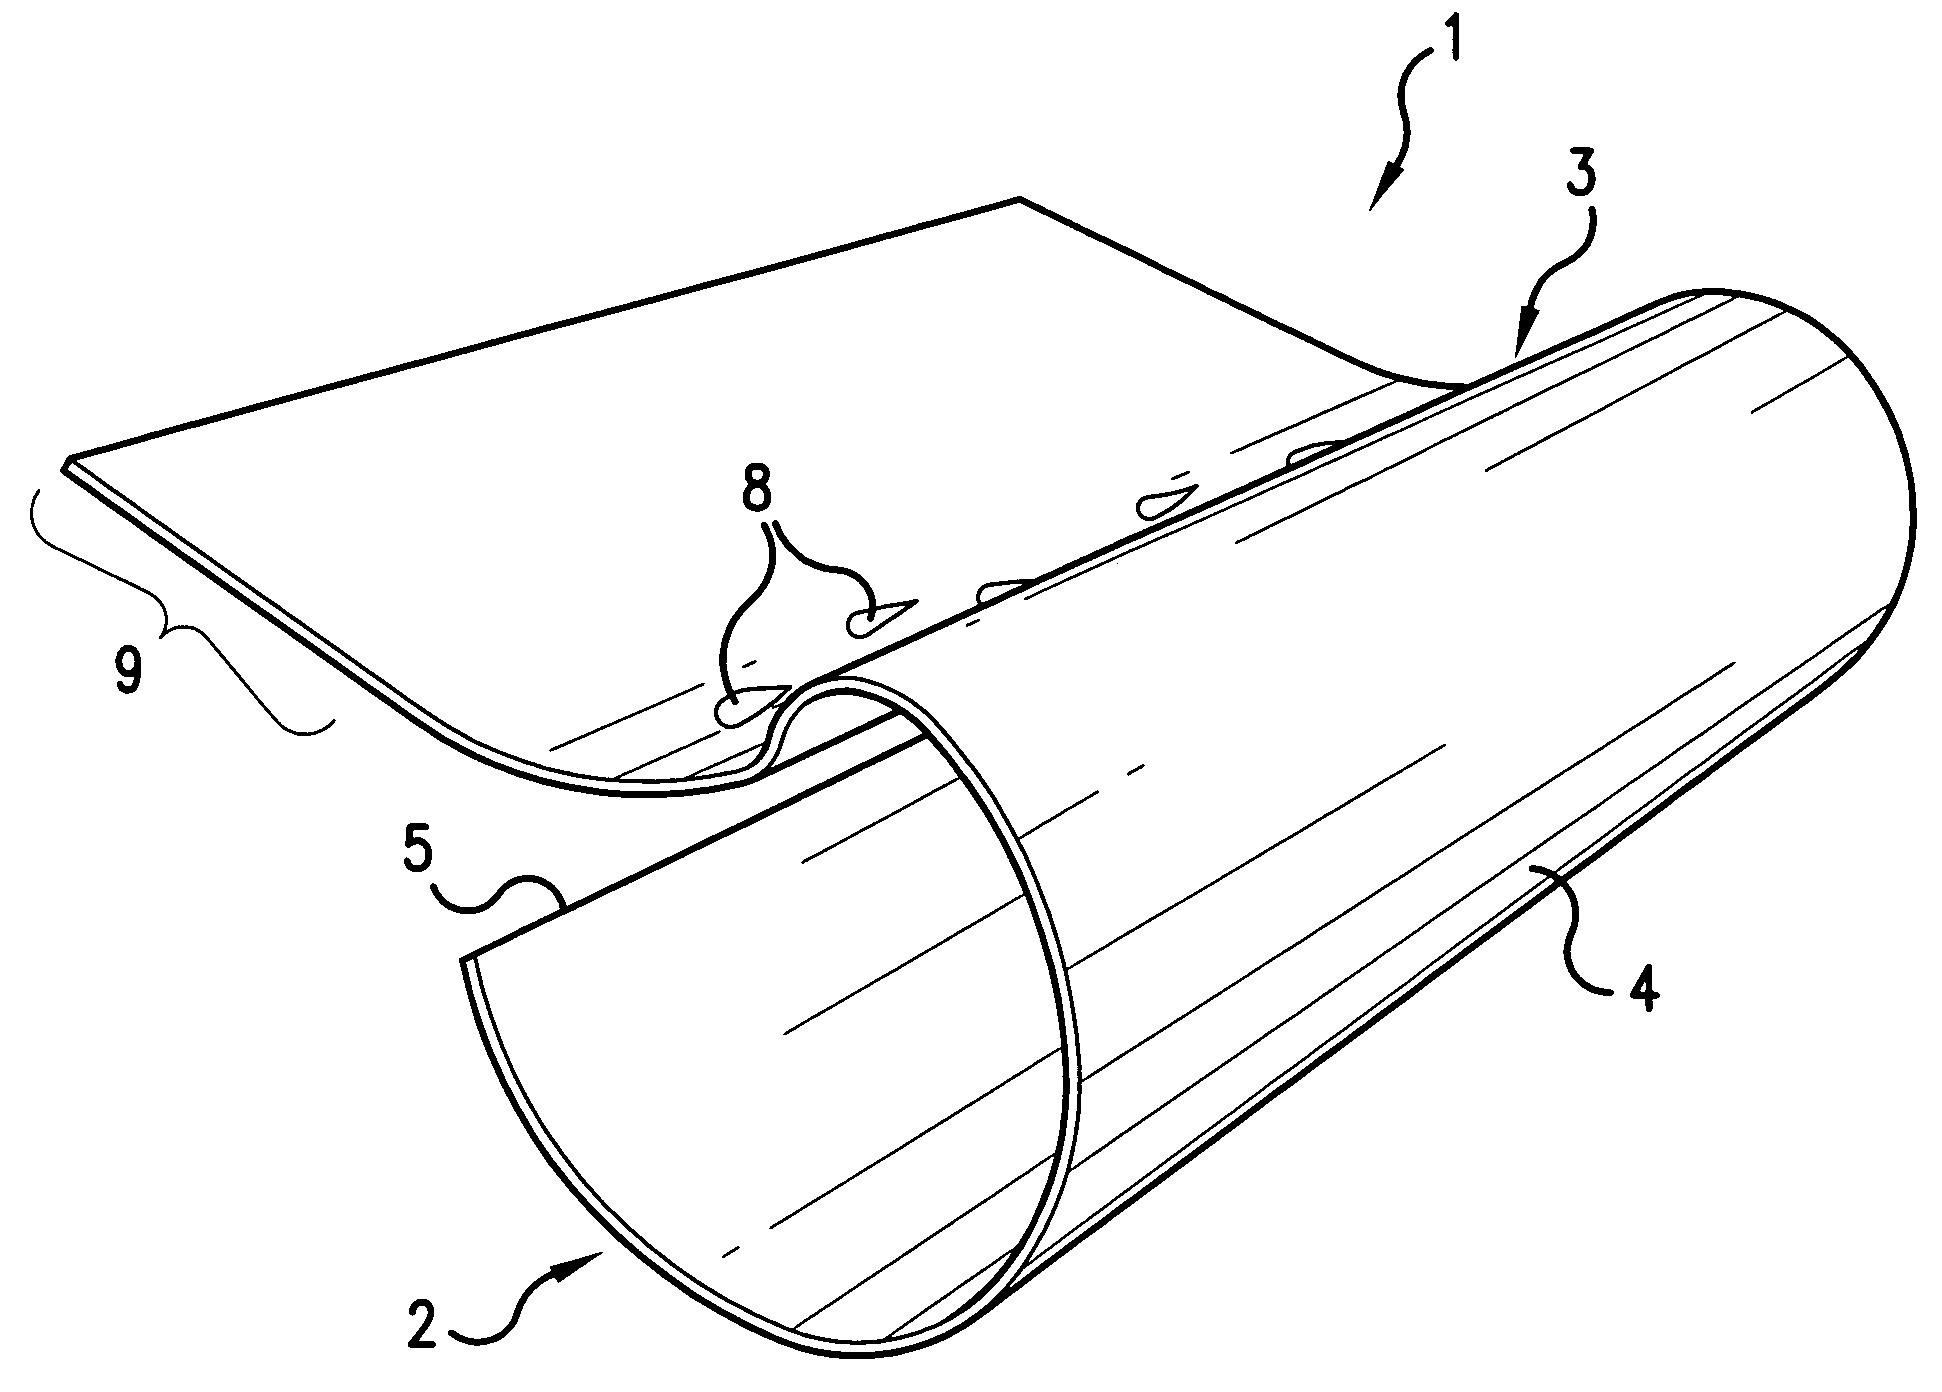 Gutter member and shielding device incorporating same